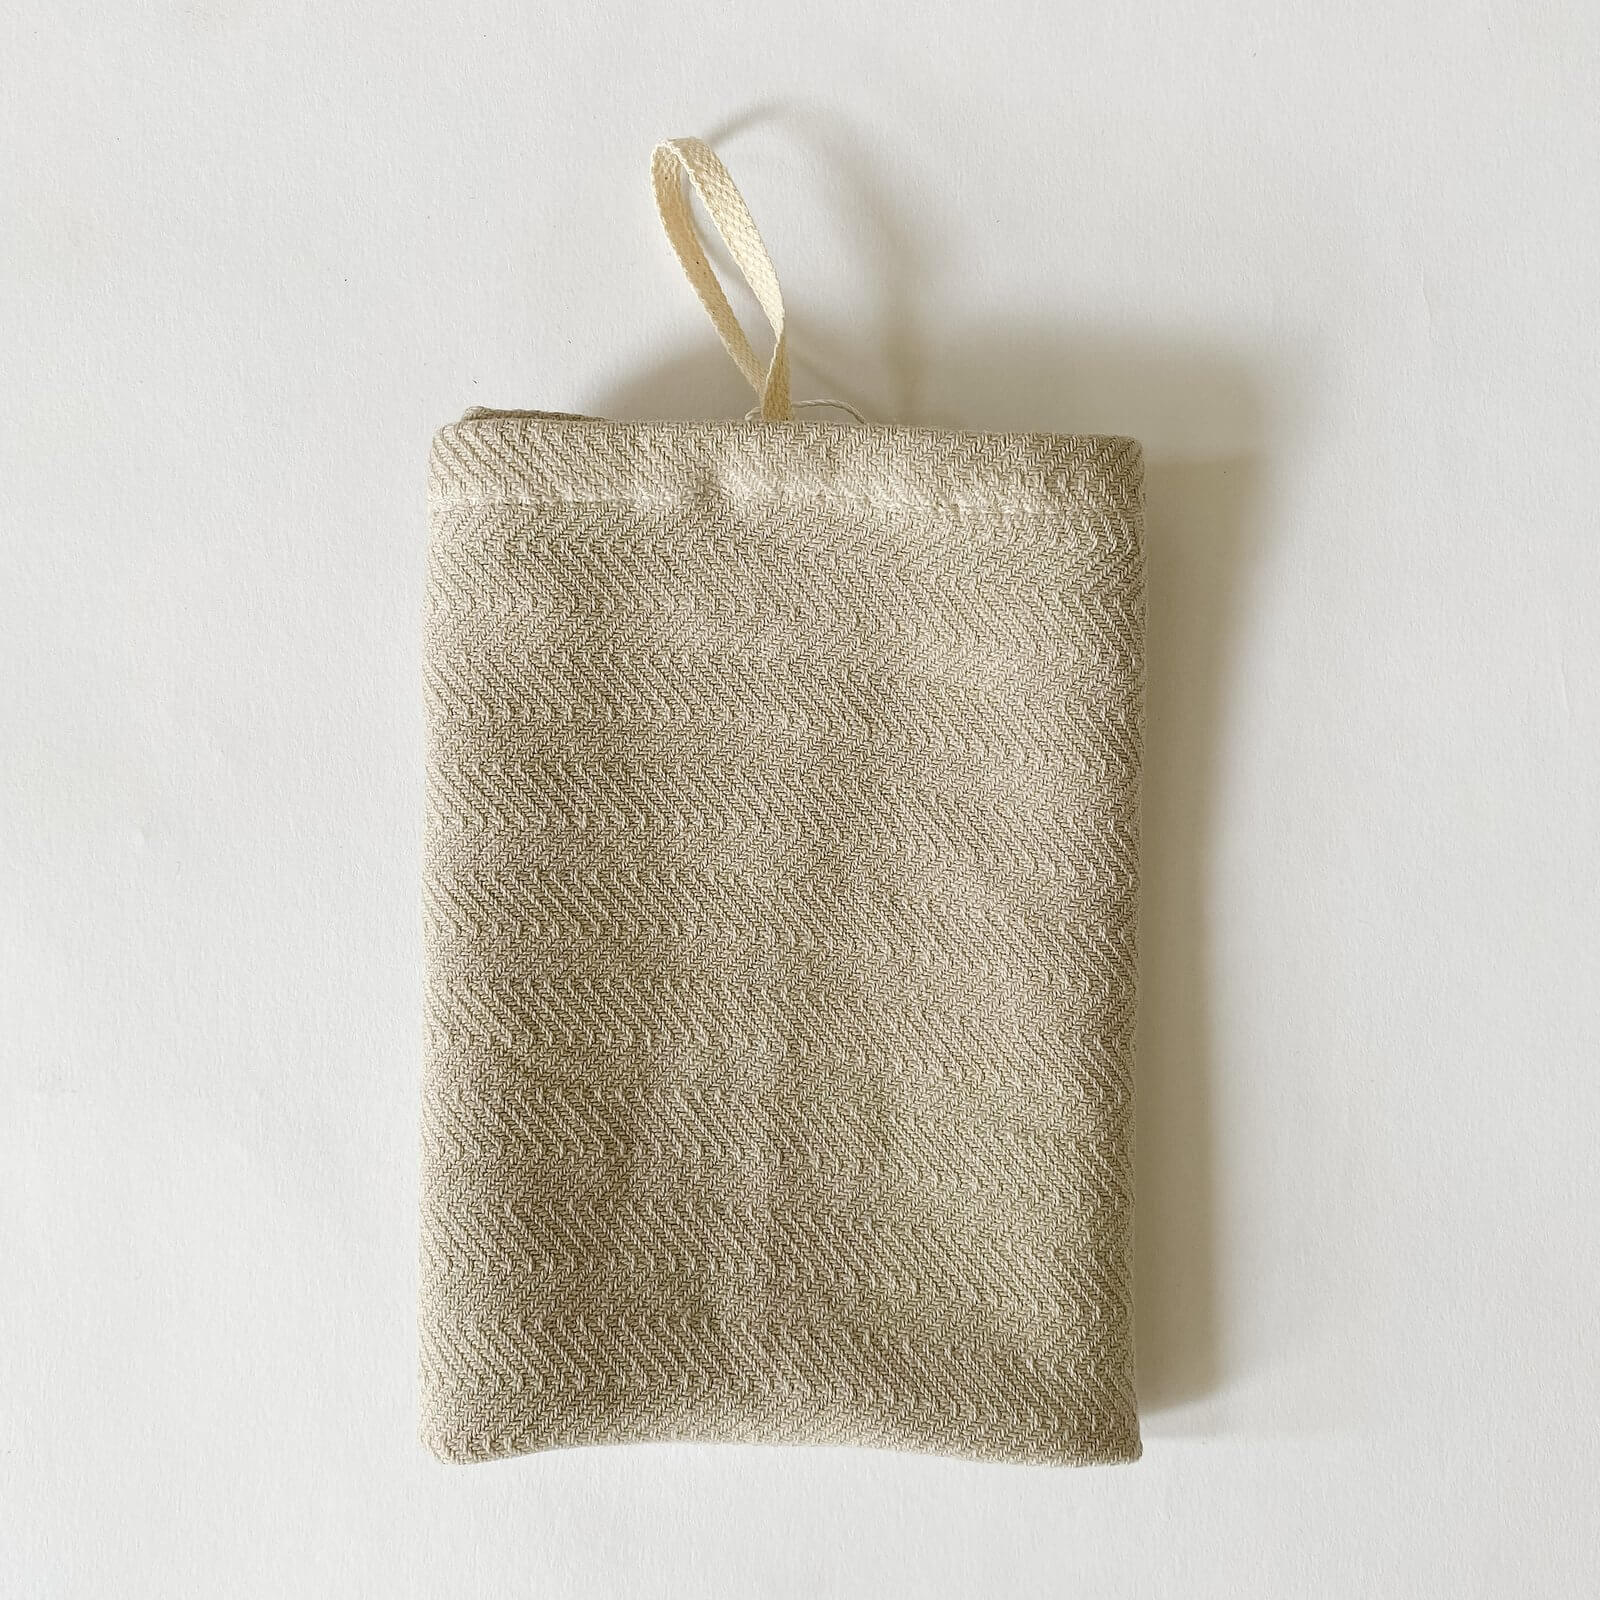 Turkish Cotton Wash Cloth - by House of Jude Skincare House of Jude Oat Milk Prettycleanshop